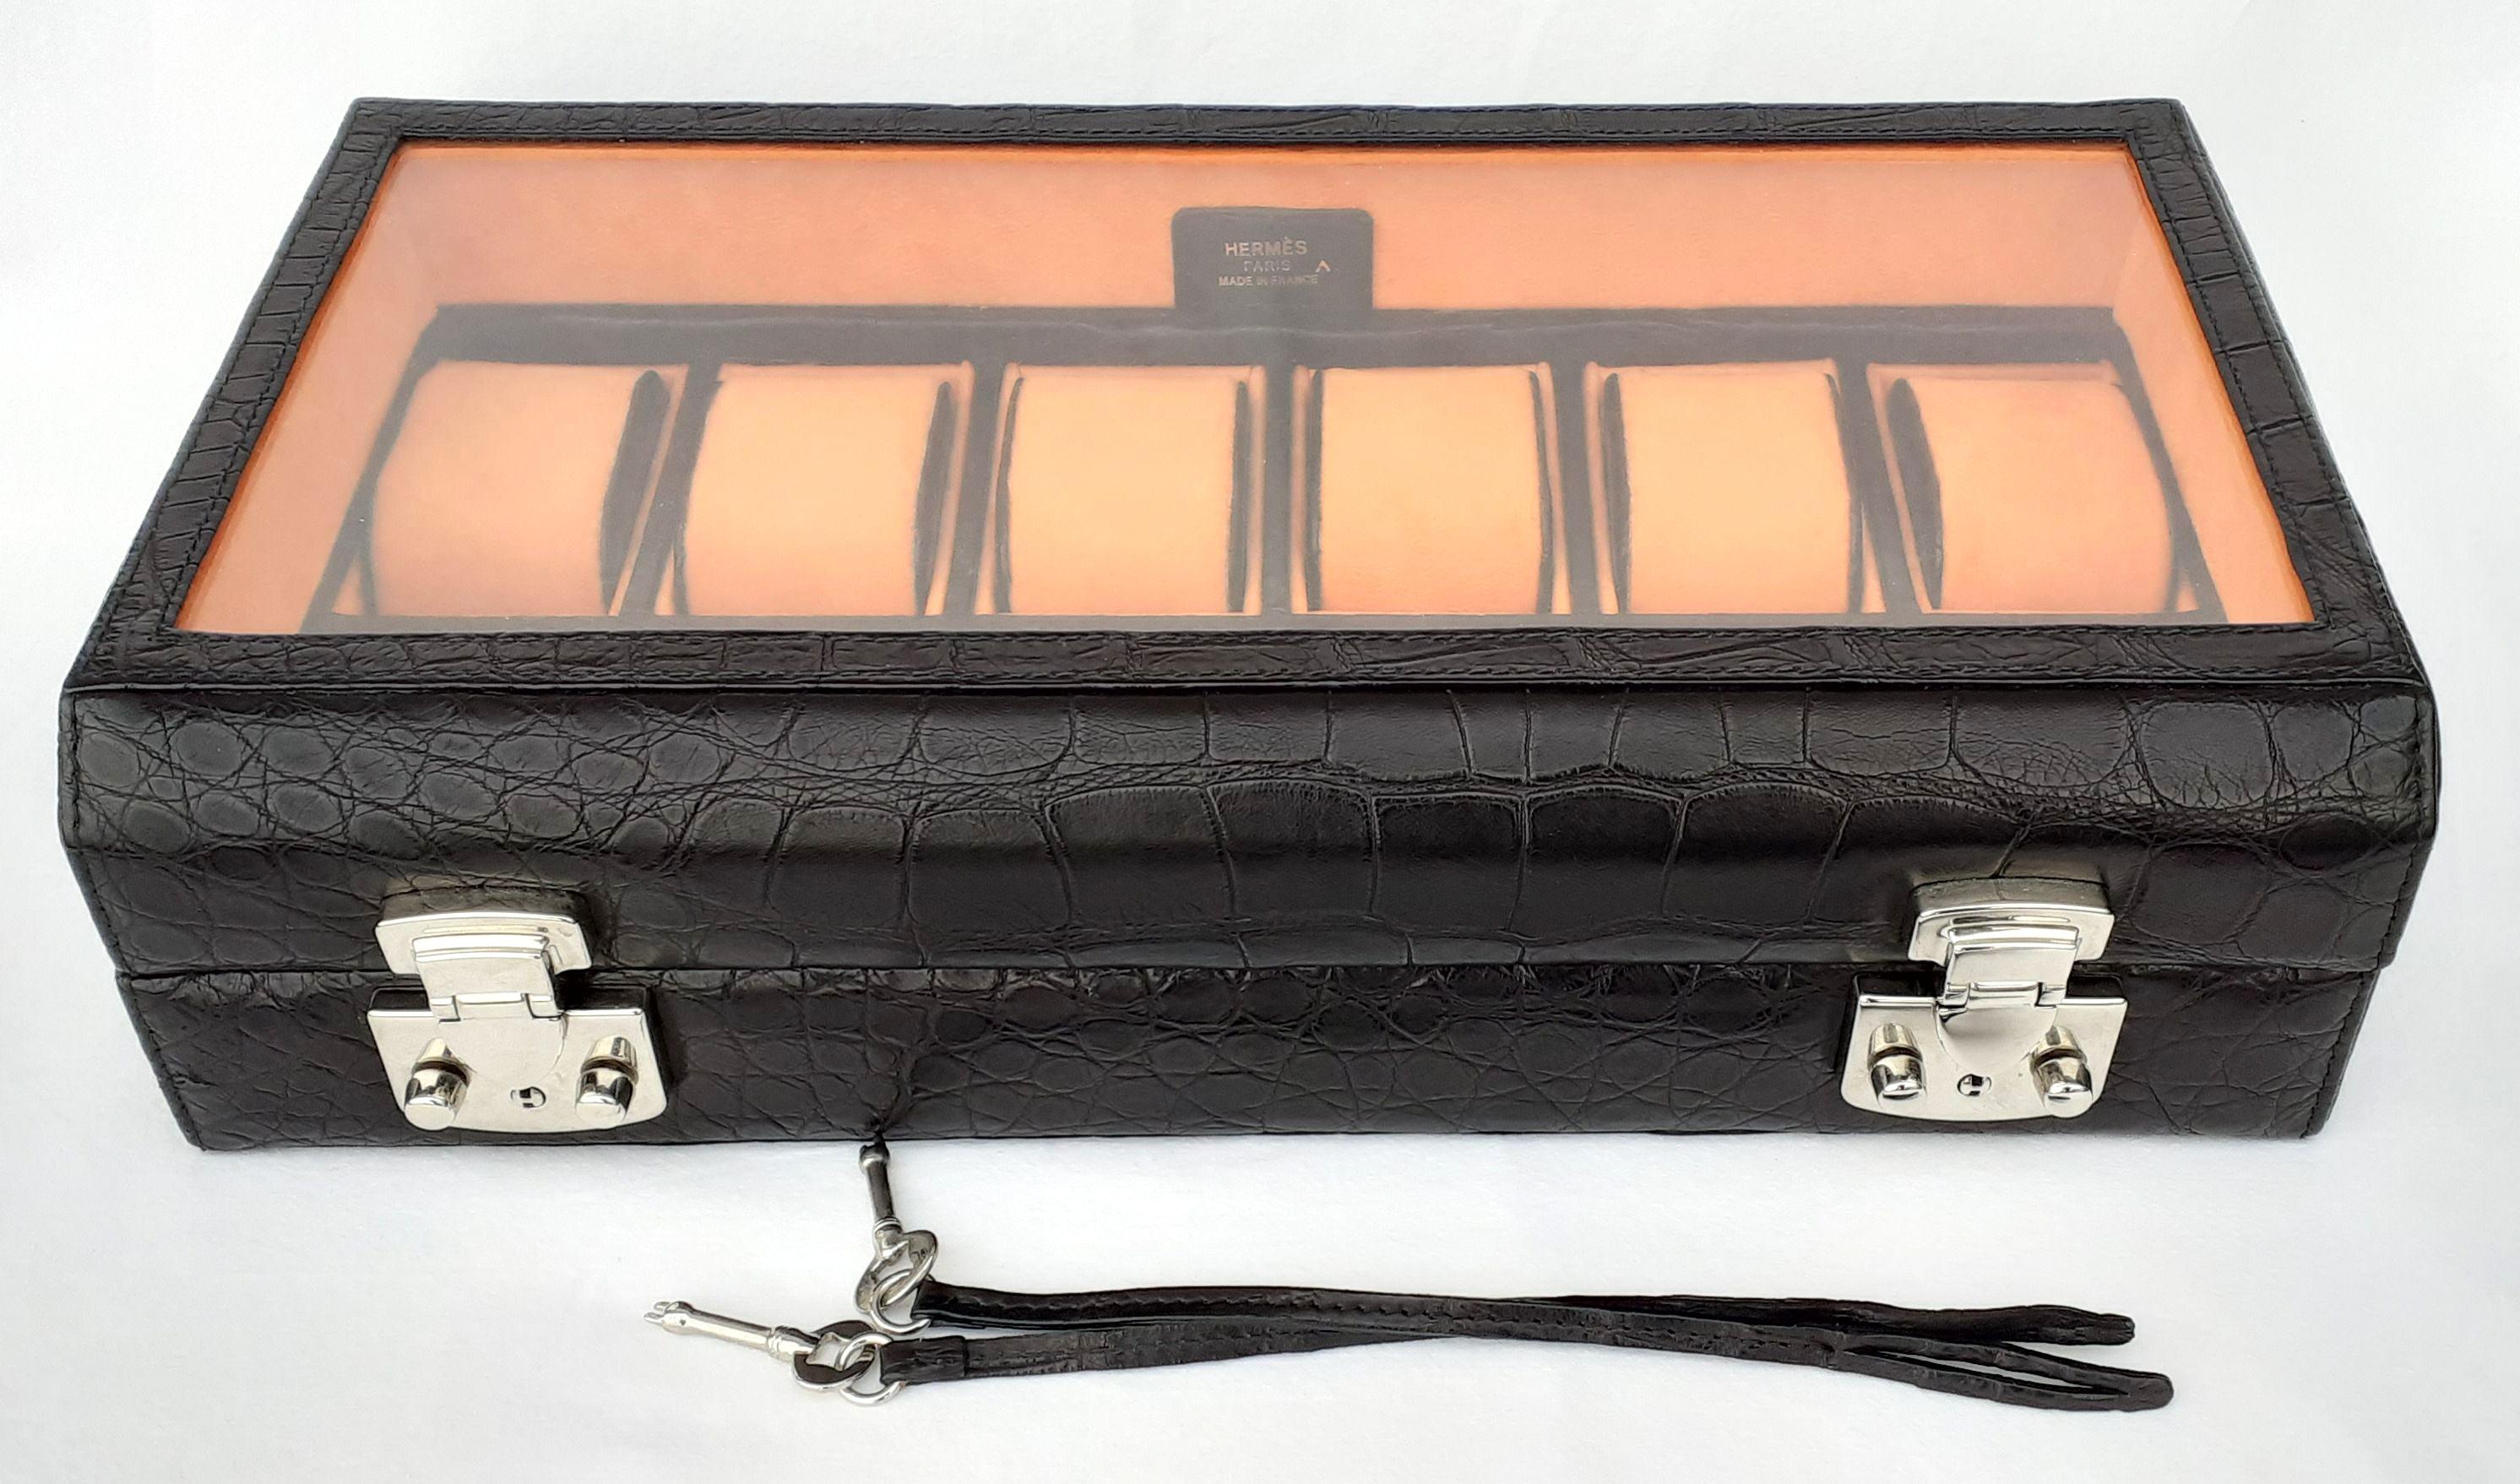 Rare and Gorgeous Authentic Hermès Watch Box

To store watches, but can be used to store jewels as well

Made of Crocodile Porosus

Inside includes 12 boxes and 12 orange felt cushions covered with crocodile

Lid is made of glass

Tag made of